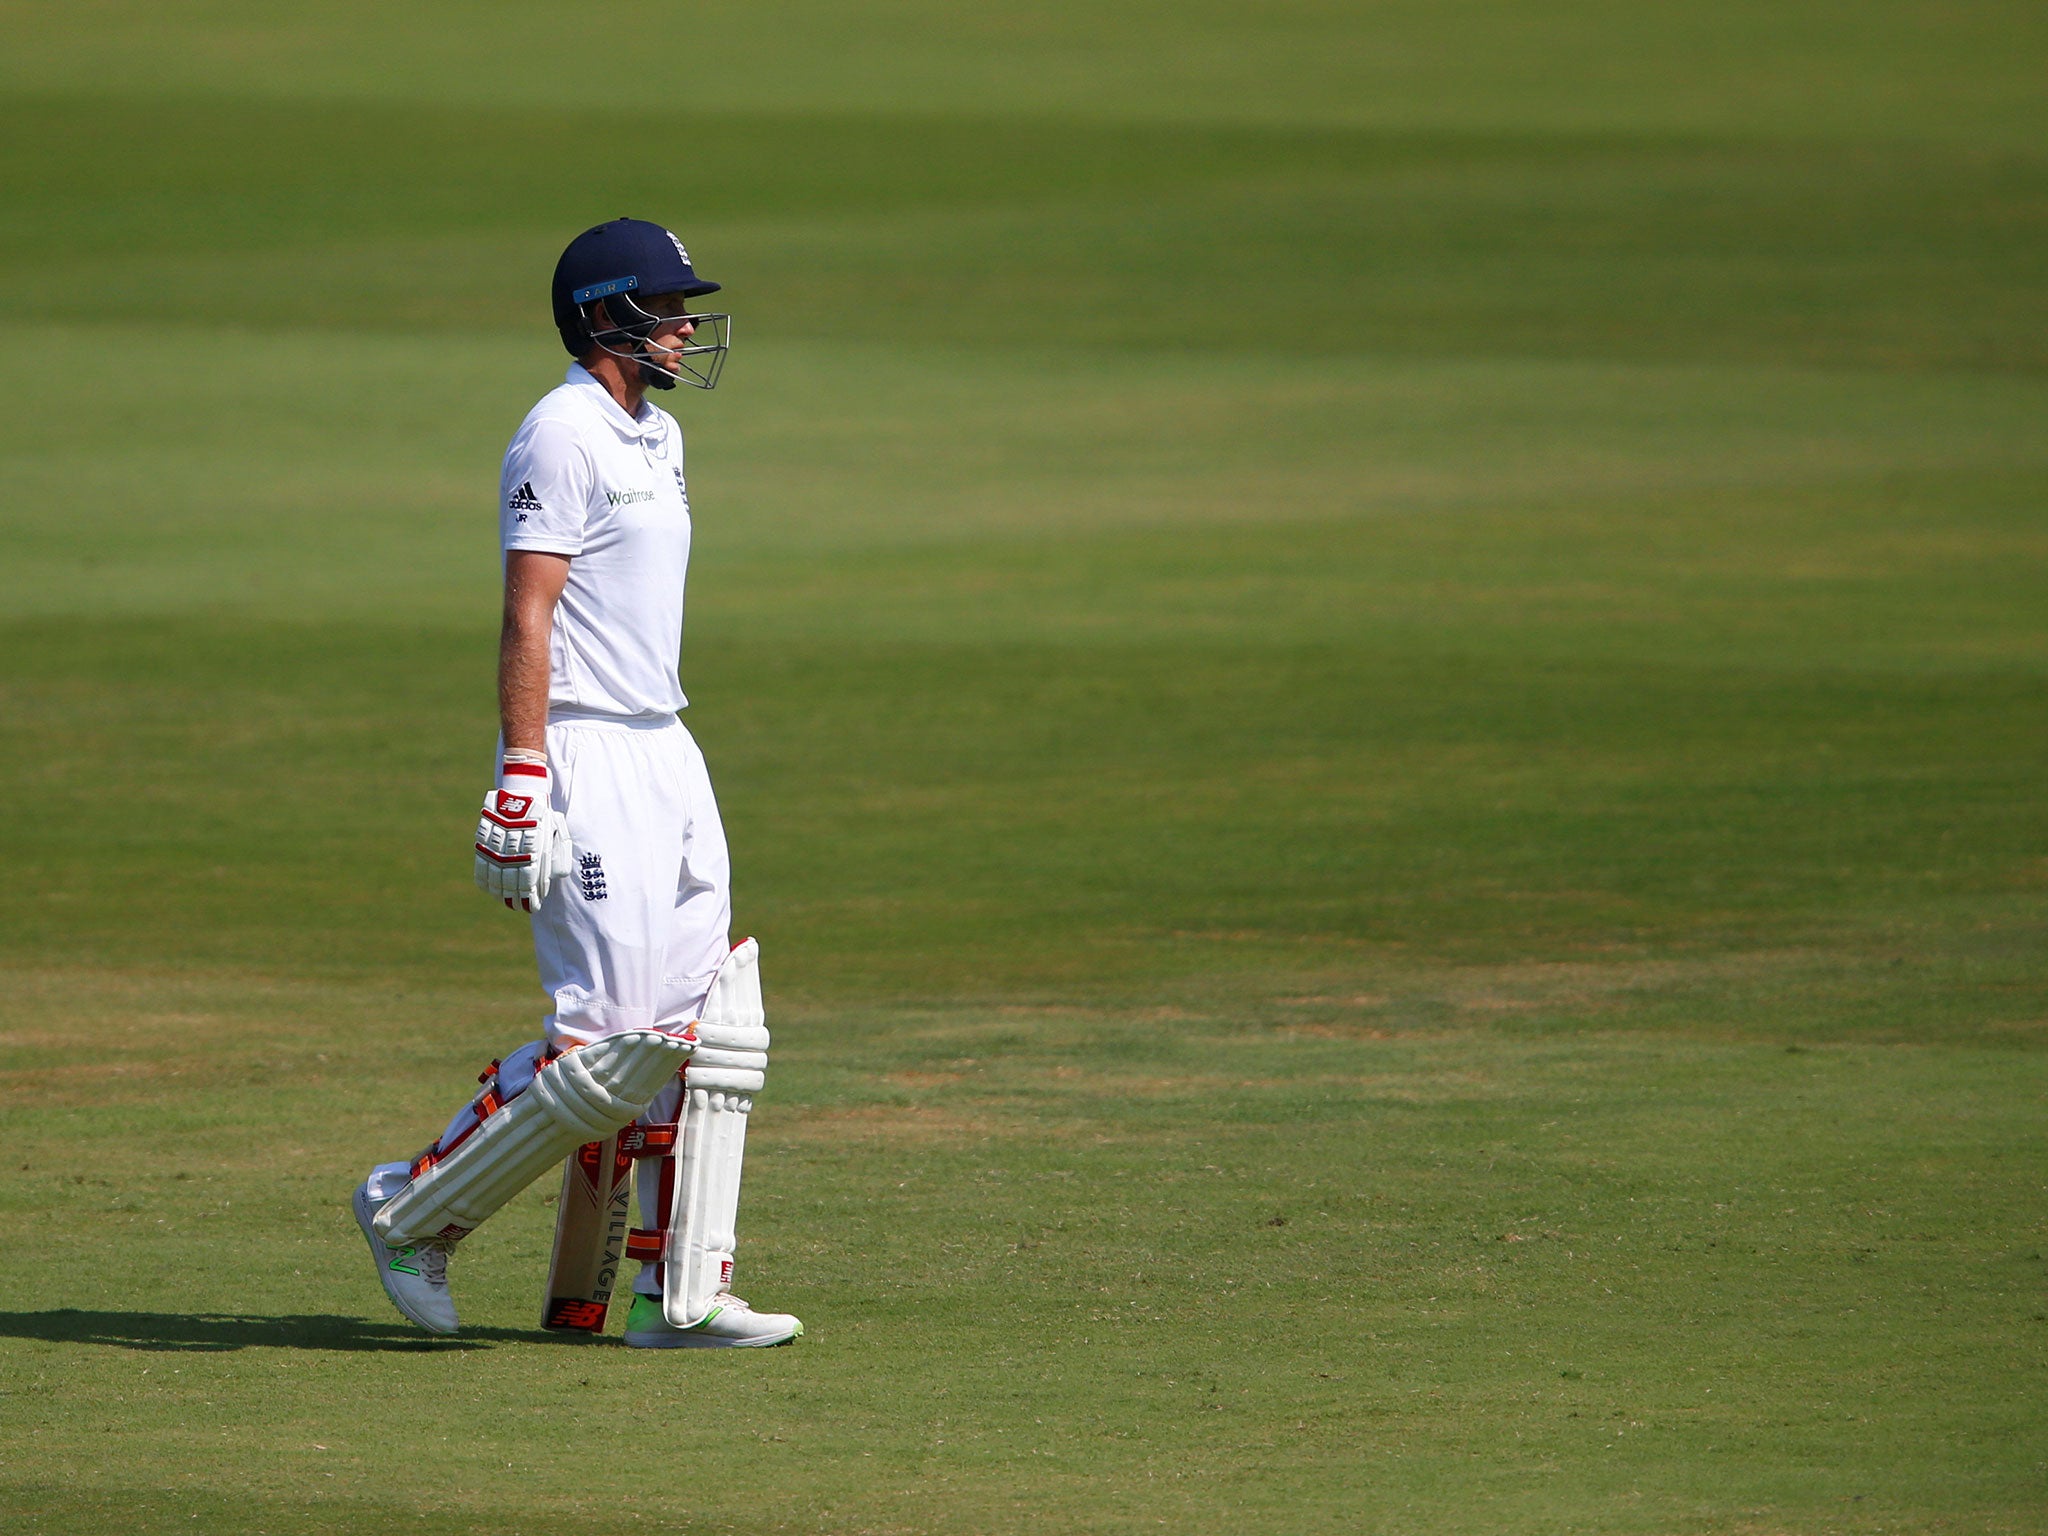 Joe Root takes his leave after being dismissed on the final day of the second Test